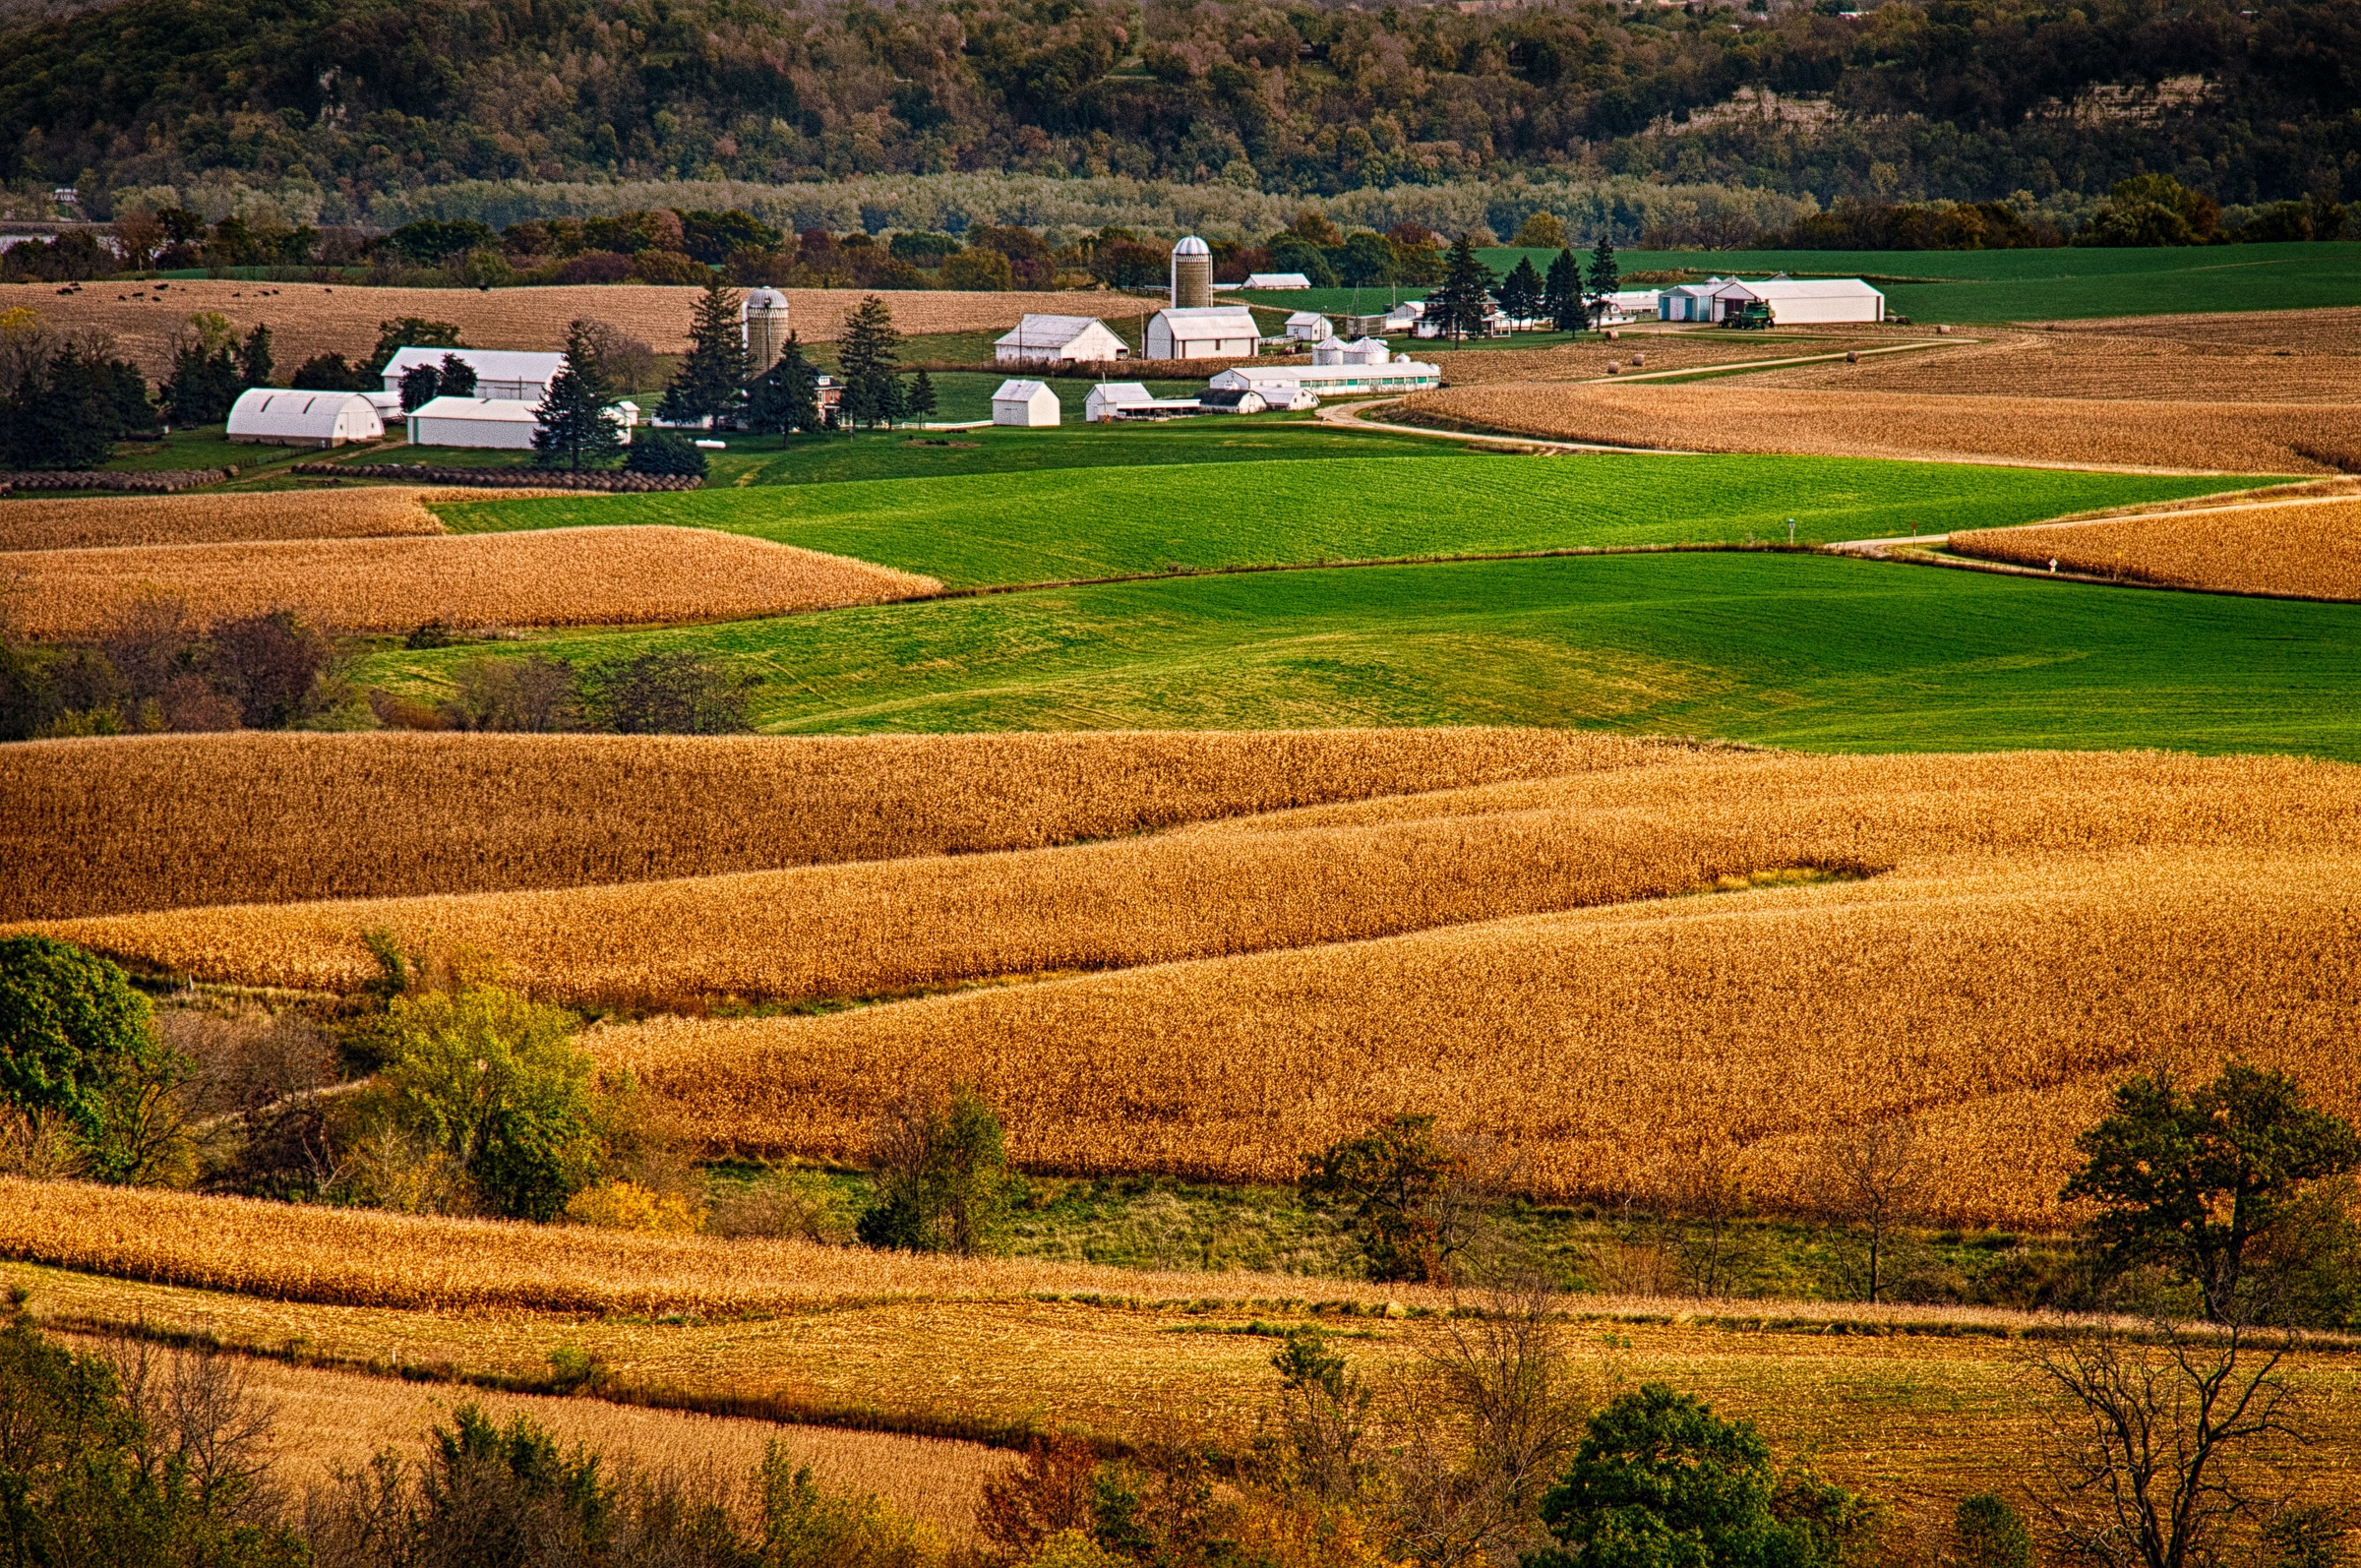 Farms and fields near Balltown, Iowa, just east of the Mississippi River. Part of the Iowa fall landscapes portfolio.